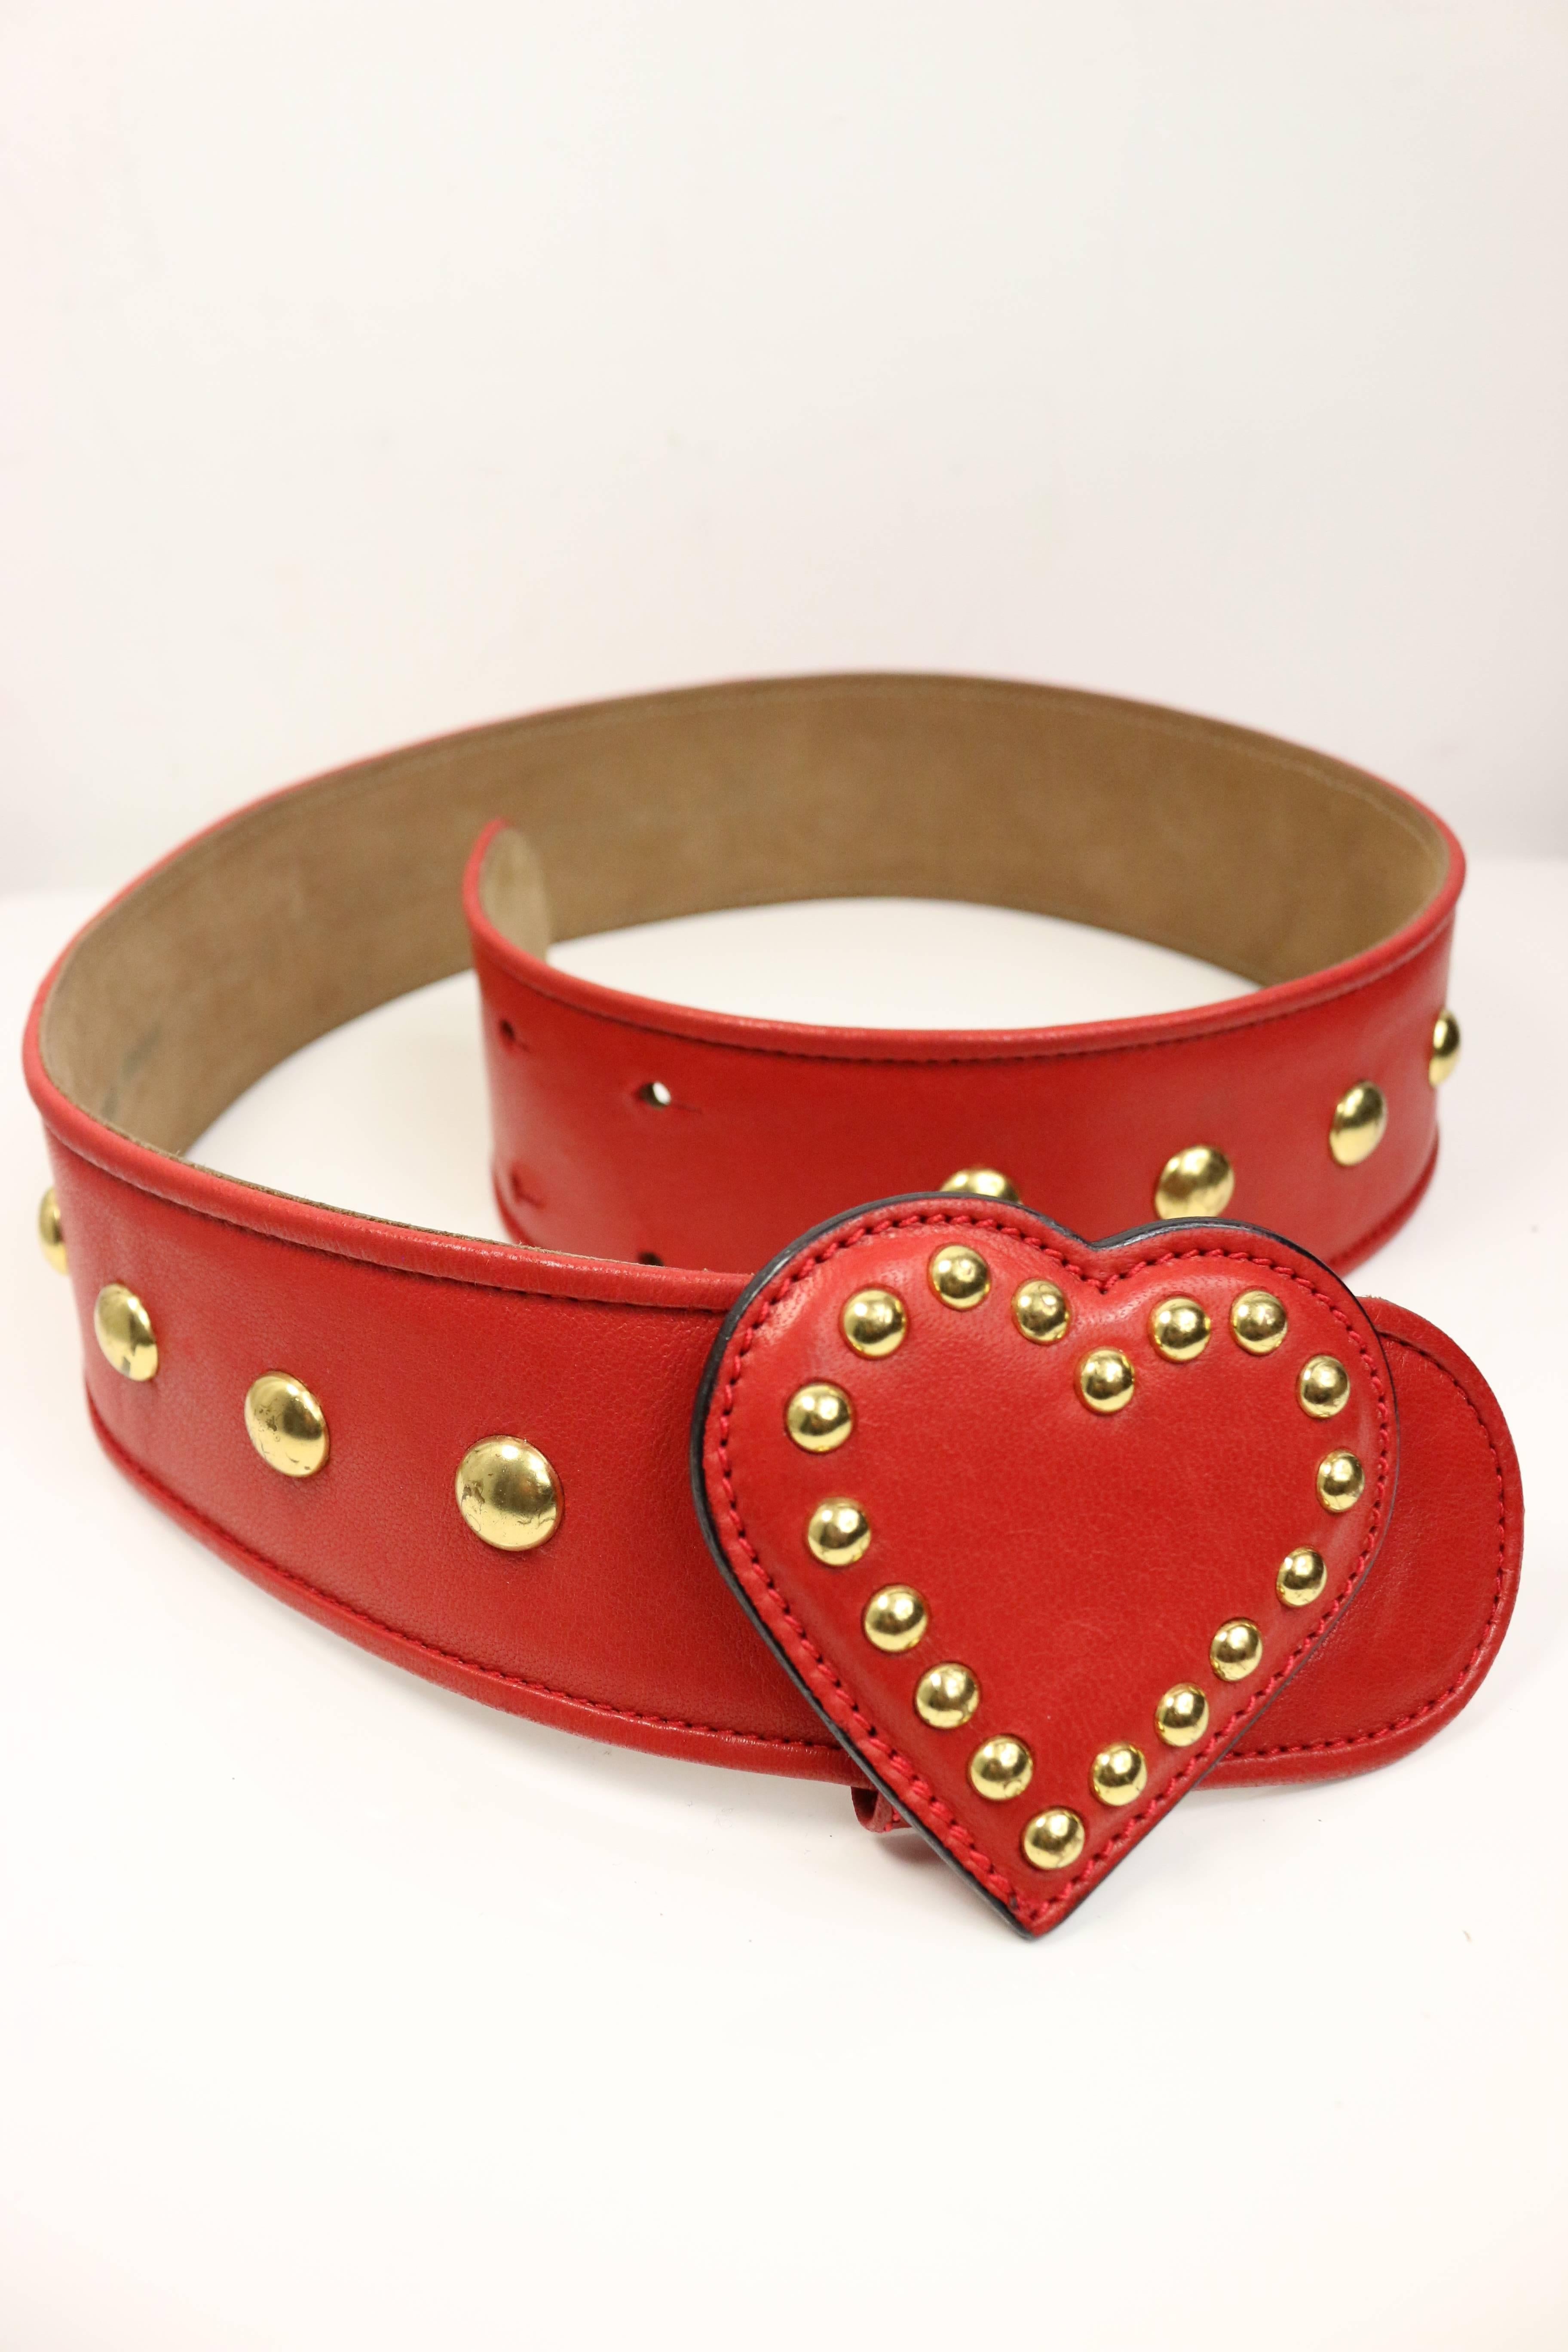 - Vintage 90s Moschino red leather with gold studded heart belt. Made by Redwall, no 401098. 

- Made in Italy. 

- Around 24 to 26 inches Waist. 